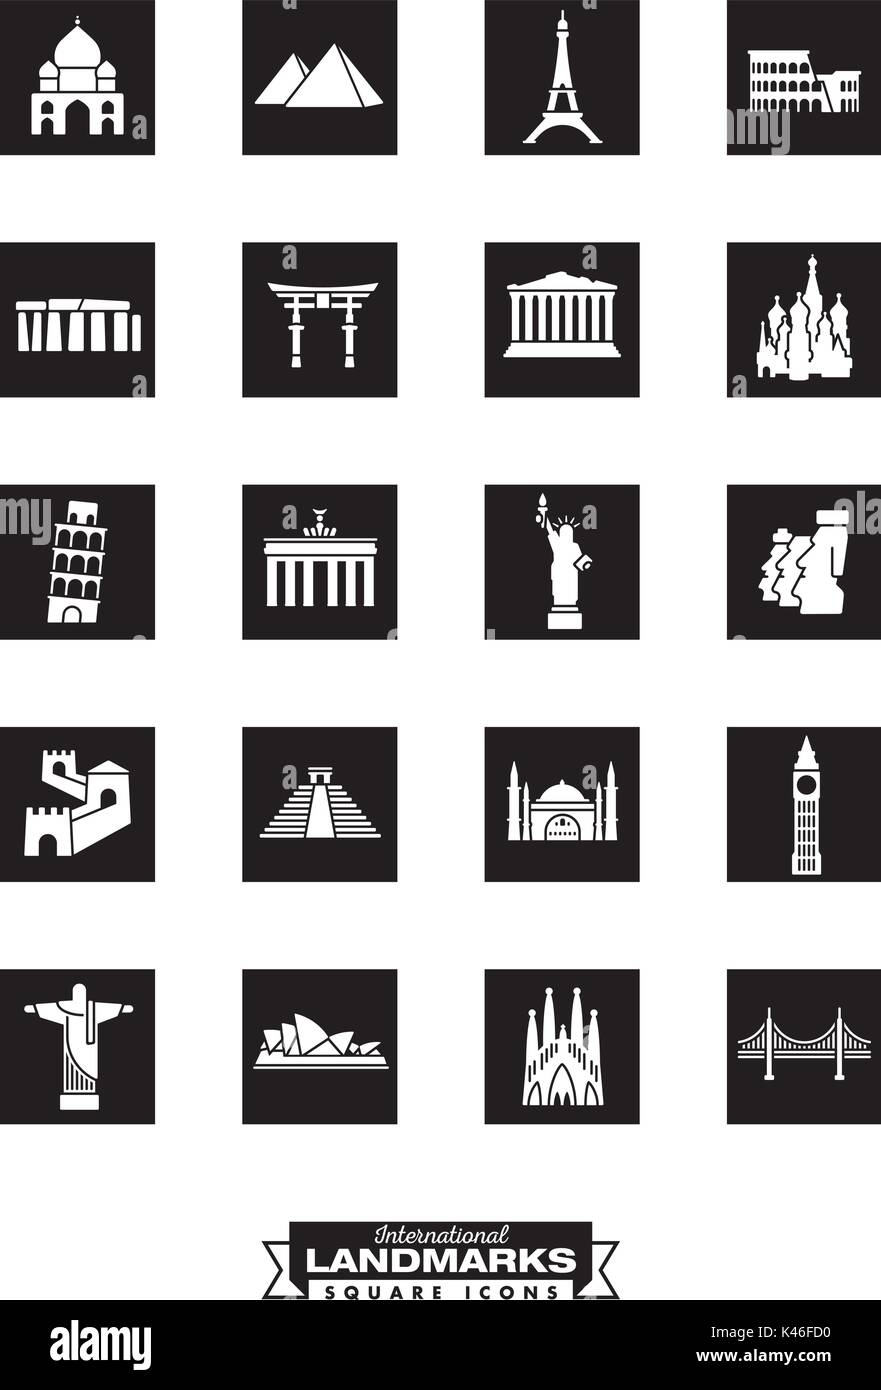 Square black icons collection of international landmarks Stock Vector